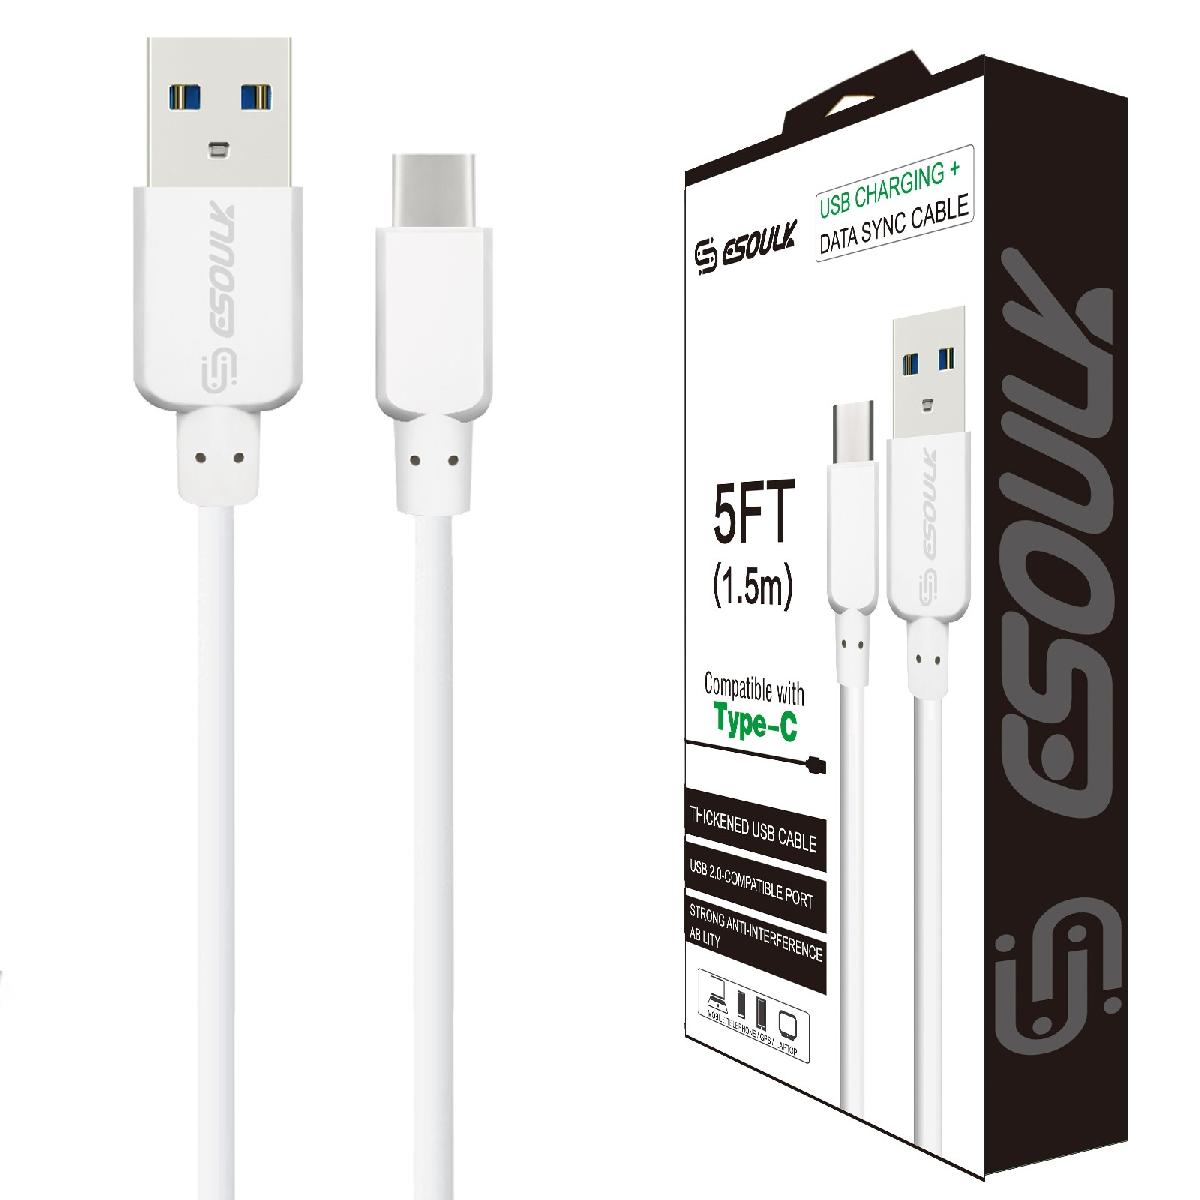 Esoulk 5Feet Charging Cable For Type C In White